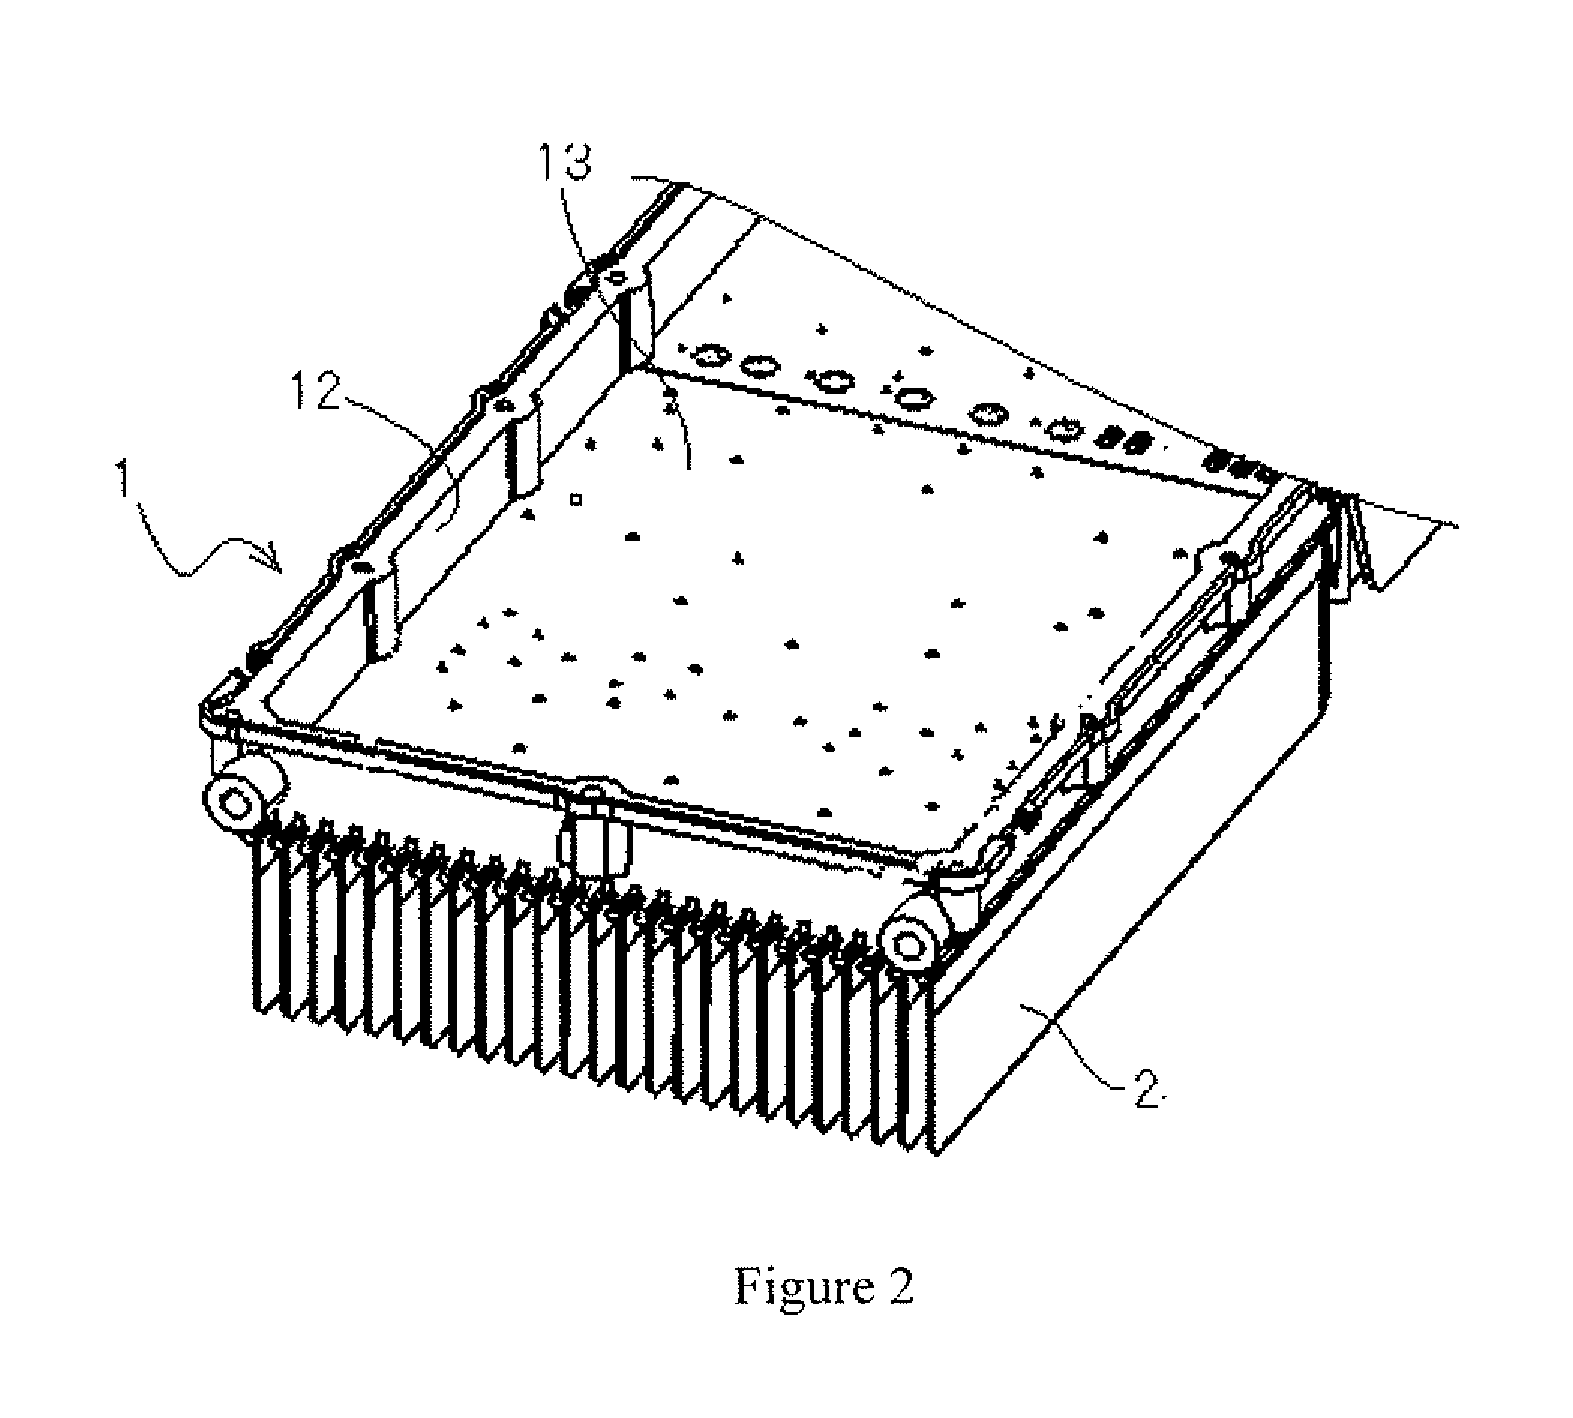 A heat dissipating enclosure with integrated cooling fins